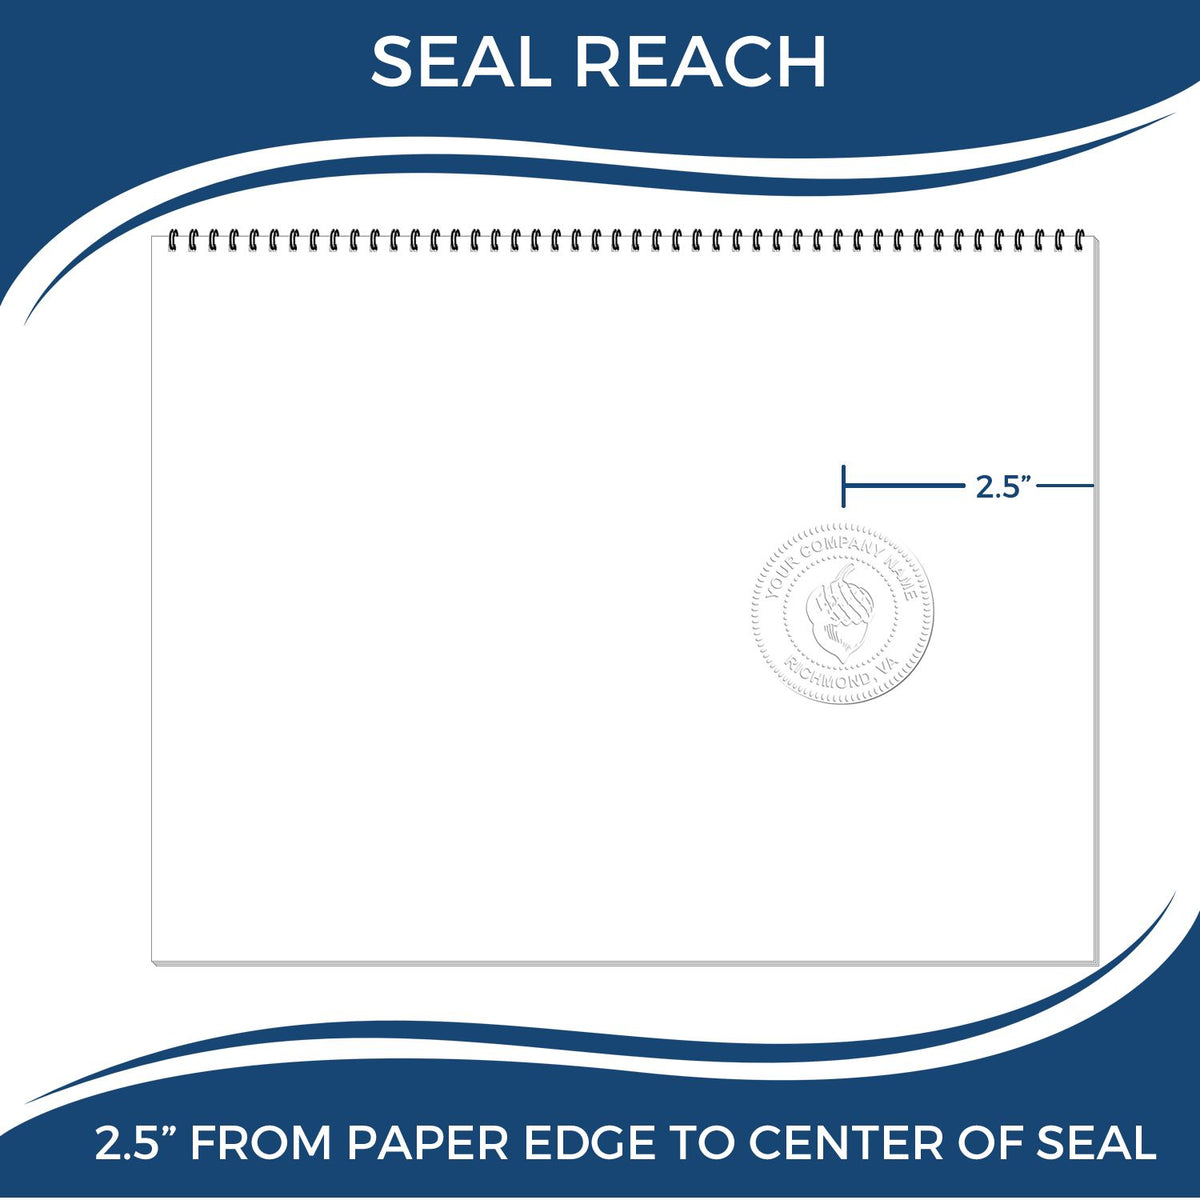 An infographic showing the seal reach which is represented by a ruler and a miniature seal image of the Heavy Duty Cast Iron Georgia Geologist Seal Embosser